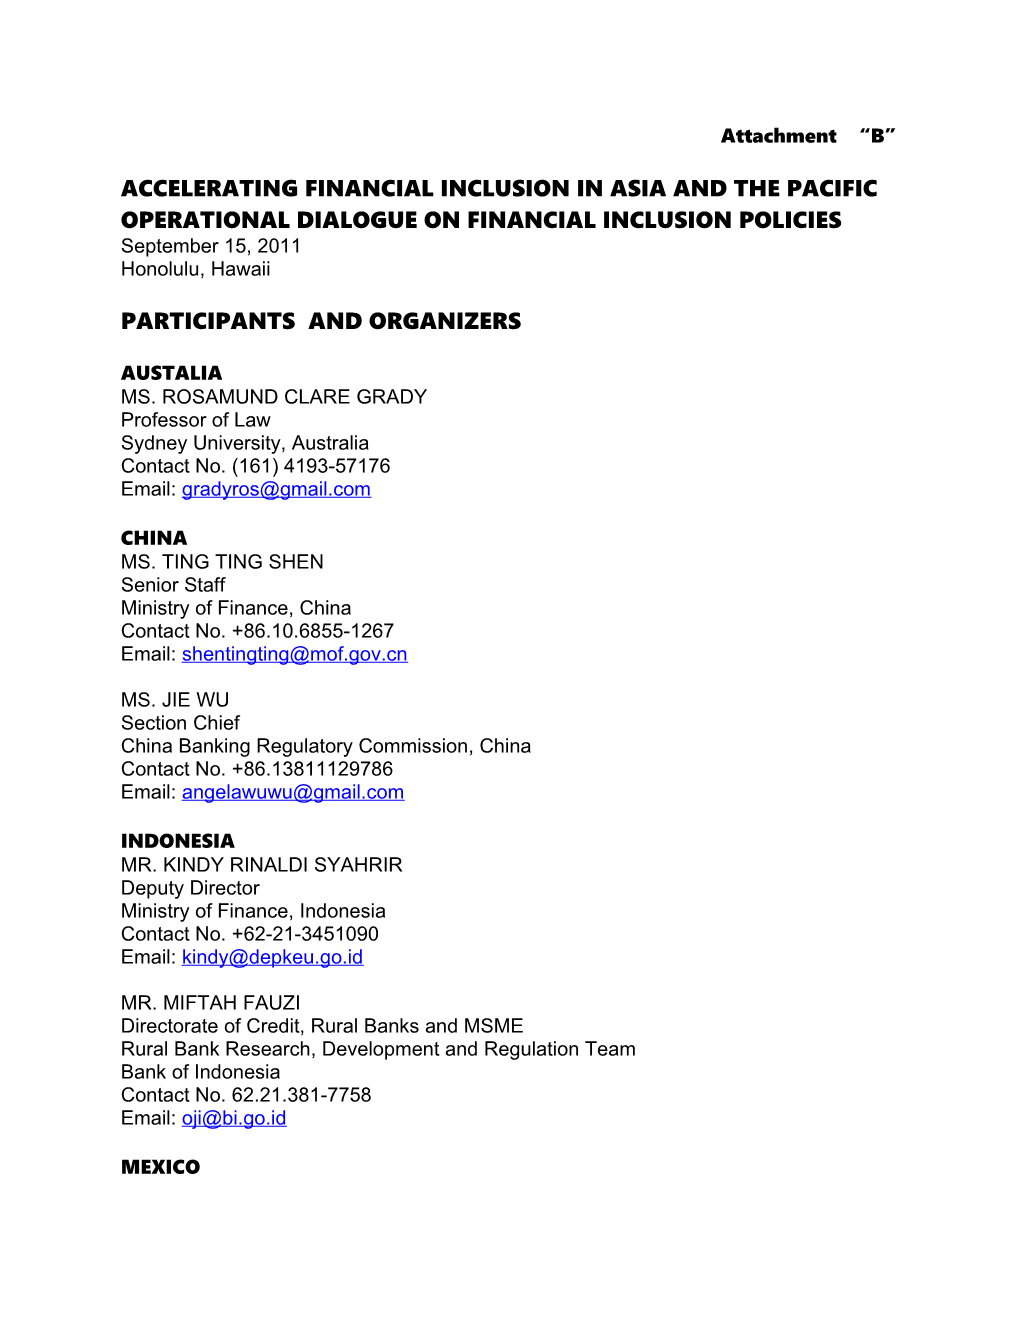 Accelerating Financial Inclusion in Asia and the Pacific Operational Dialogue on Financial